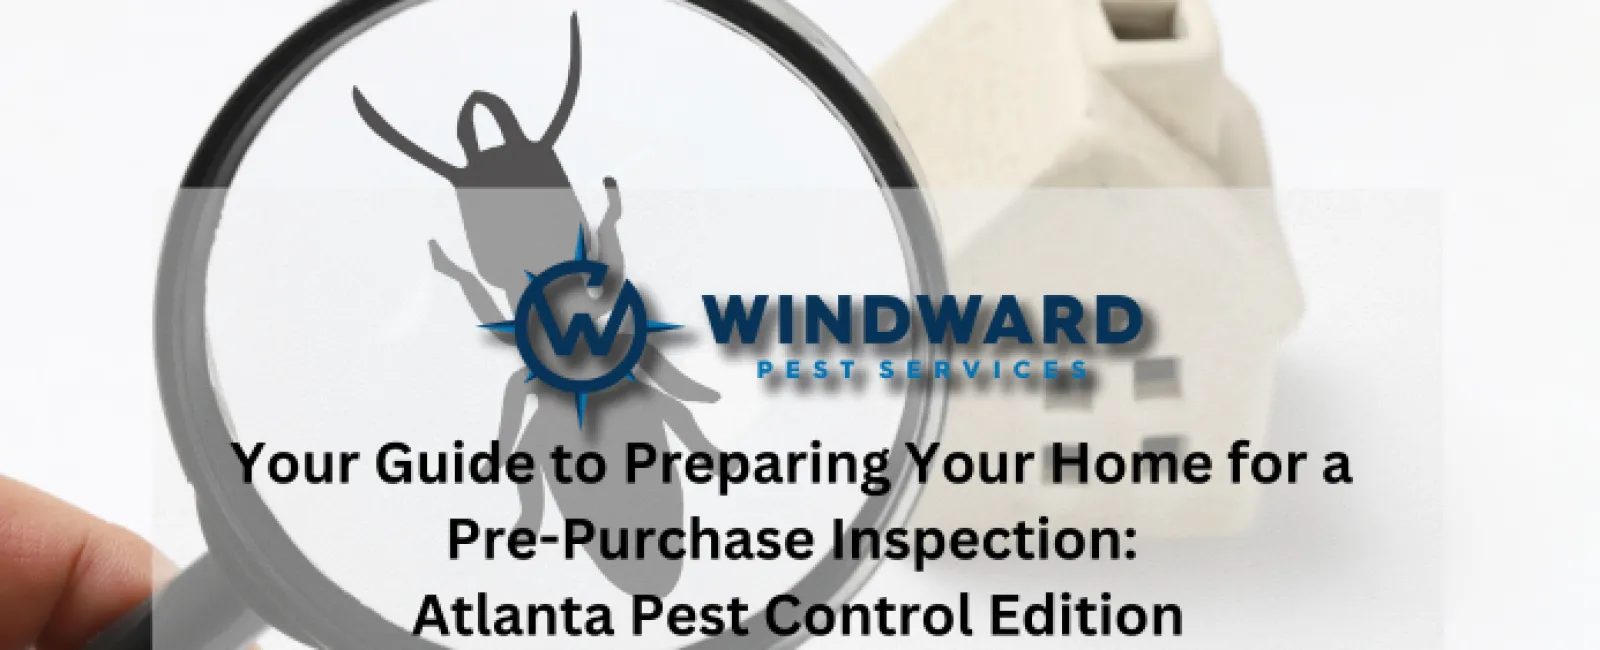 Your Guide to Preparing Your Home for a Pre-Purchase Inspection: Atlanta Pest Control Edition